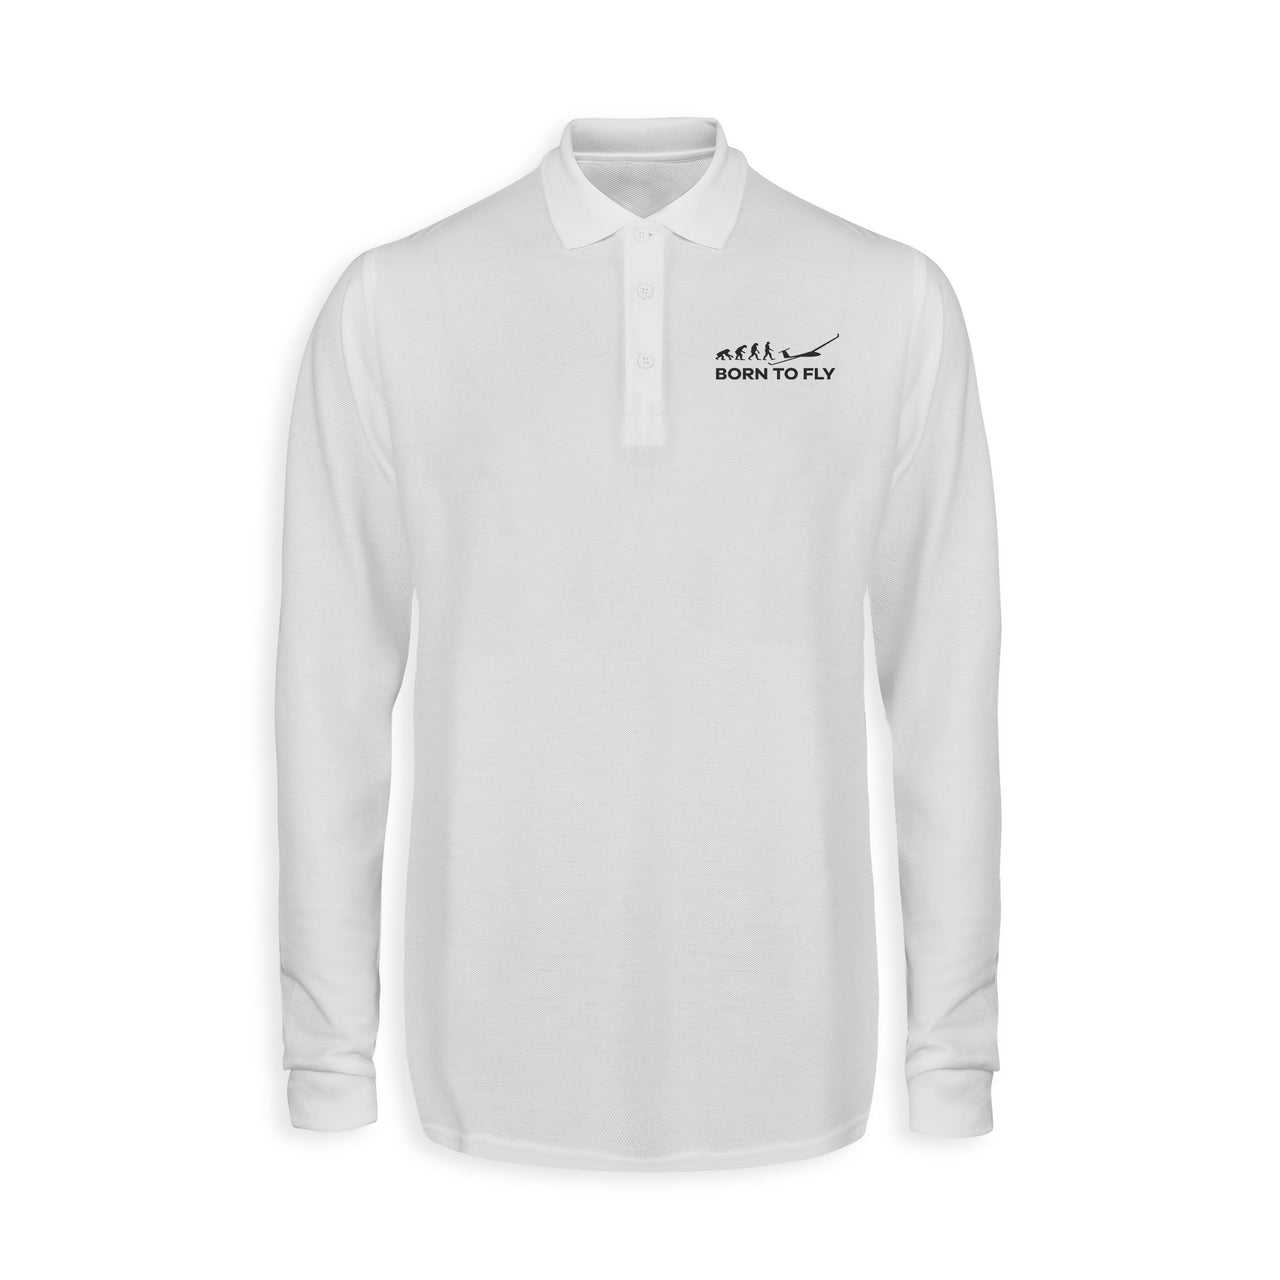 Born To Fly Glider Designed Long Sleeve Polo T-Shirts